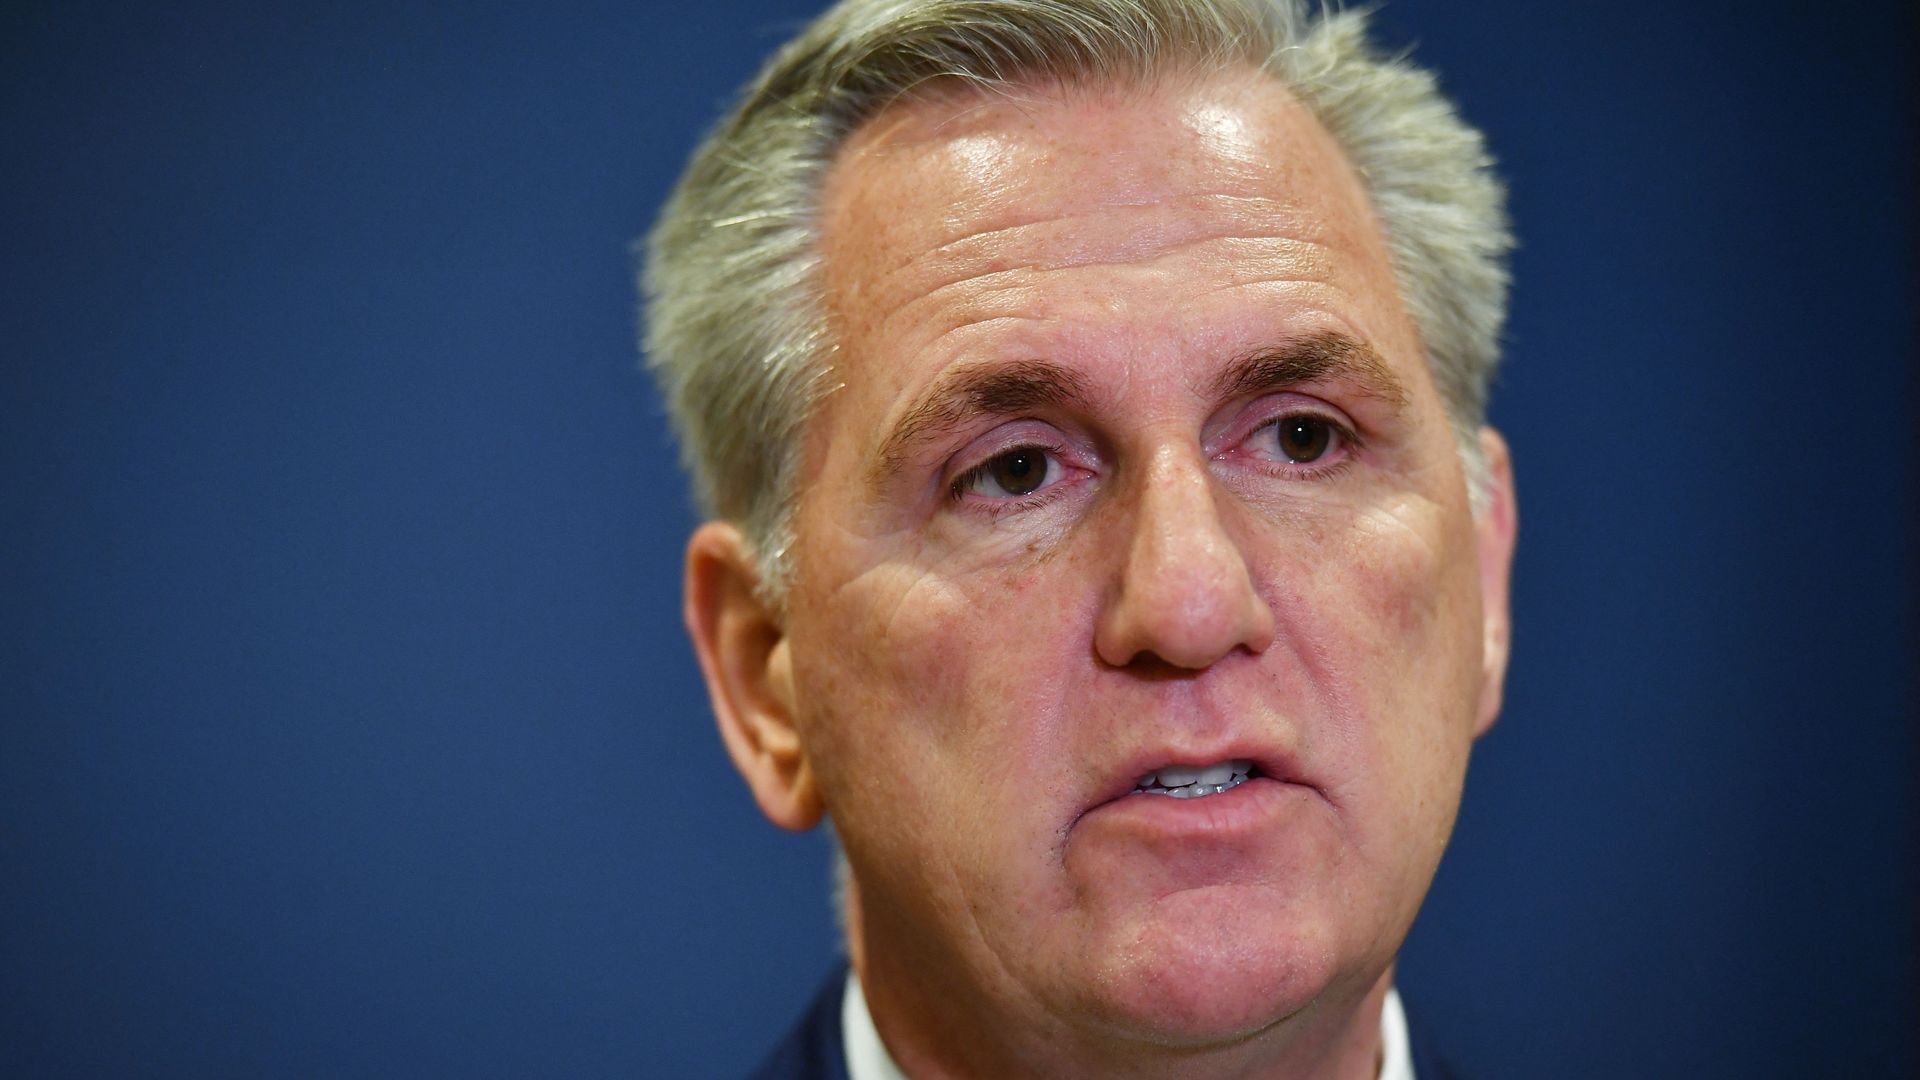 Photo of Kevin McCarthy's face